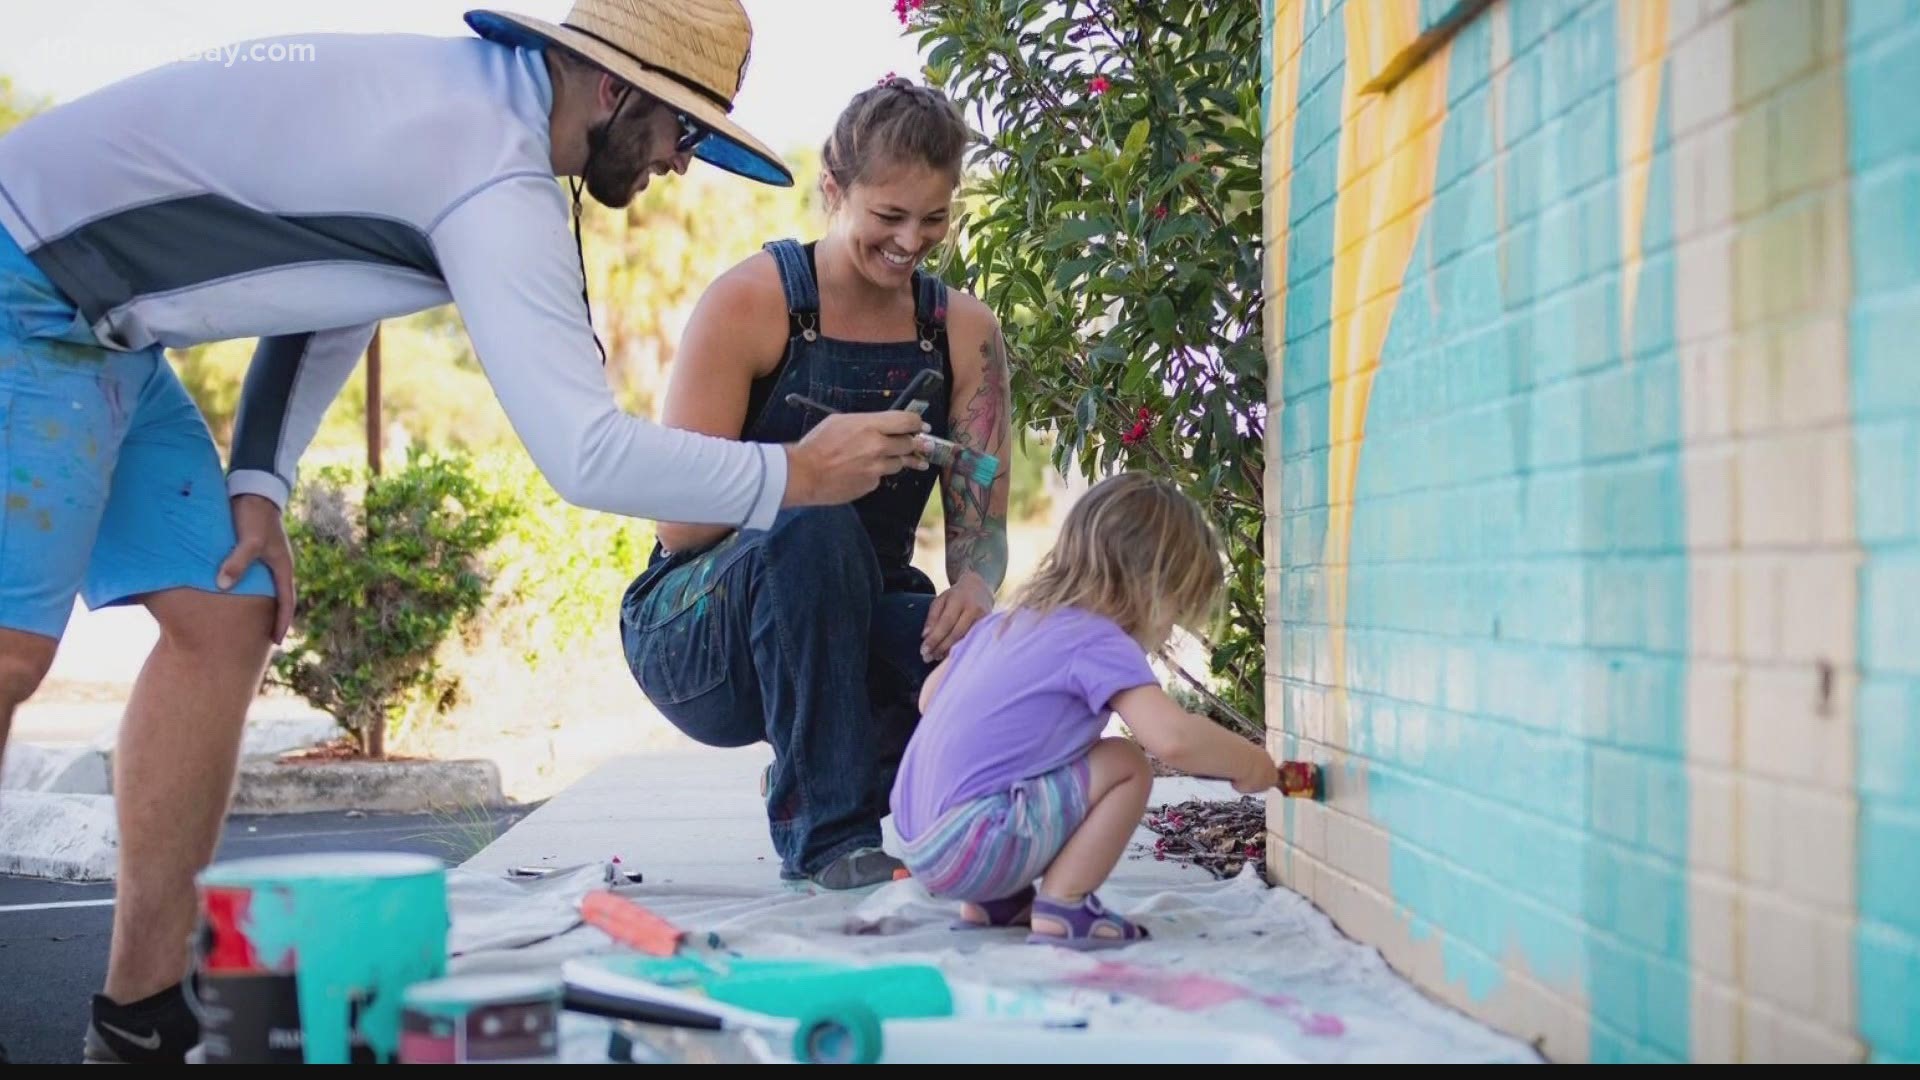 Muralists Braden Everly and his wife, Alyssa, are inviting the community to help them paint a giant color-by-number mural to show unity in their neighborhood.